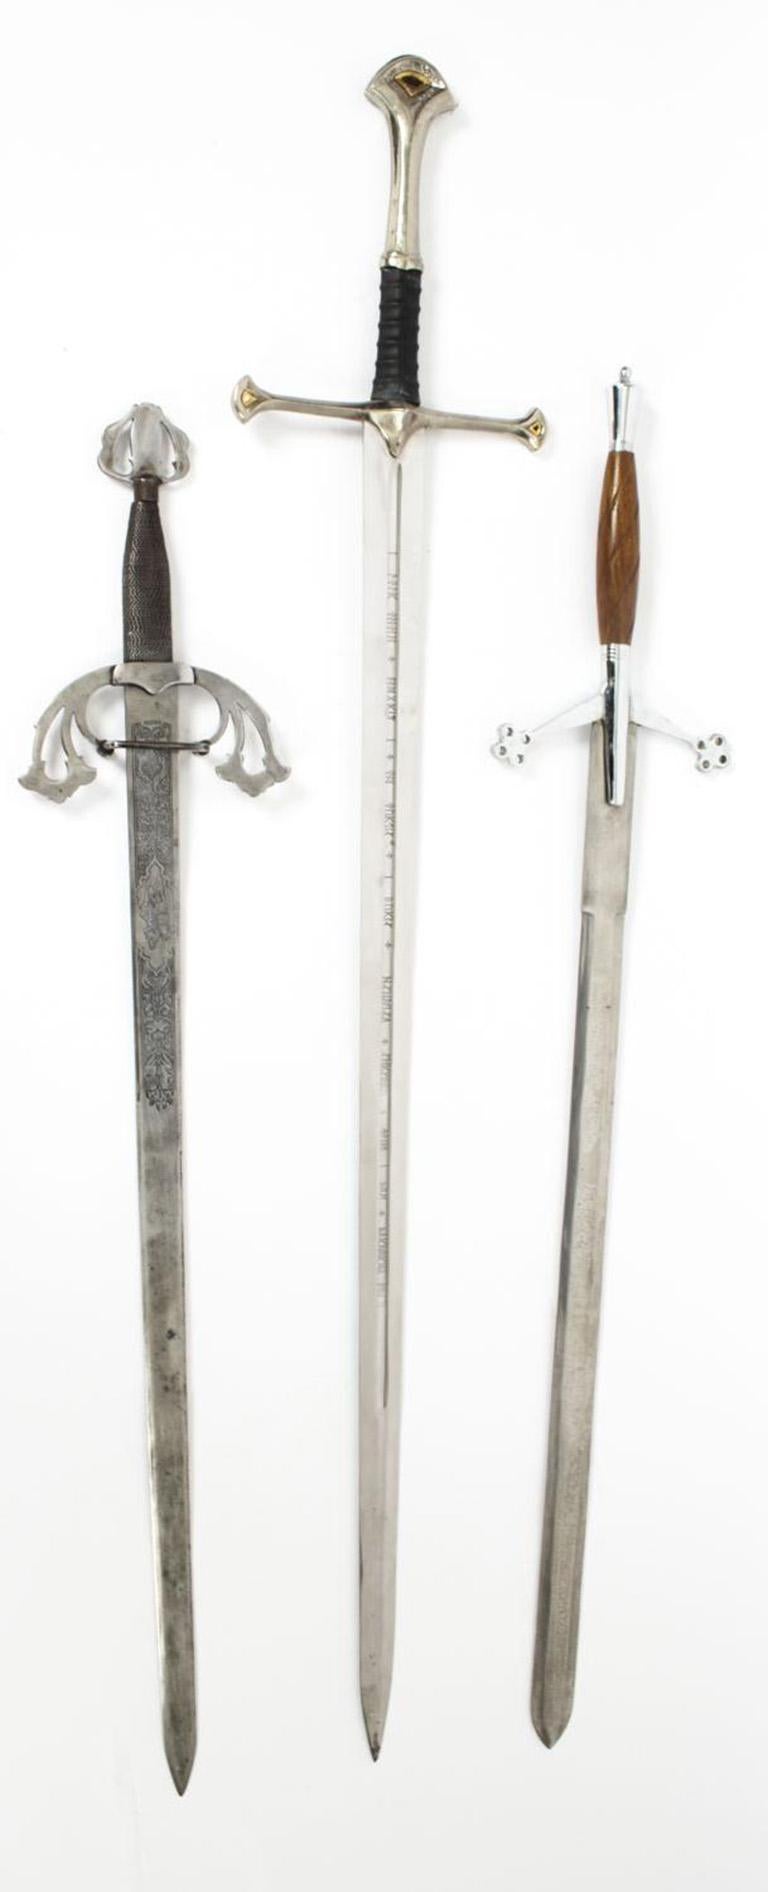 Three superb vintage claymore type two-handed swords, dating from the second half of the 20th Century.

The swords features steel pommels, hilts and decorative cross guards with a double-etched blade, one features a long deep central fuller and